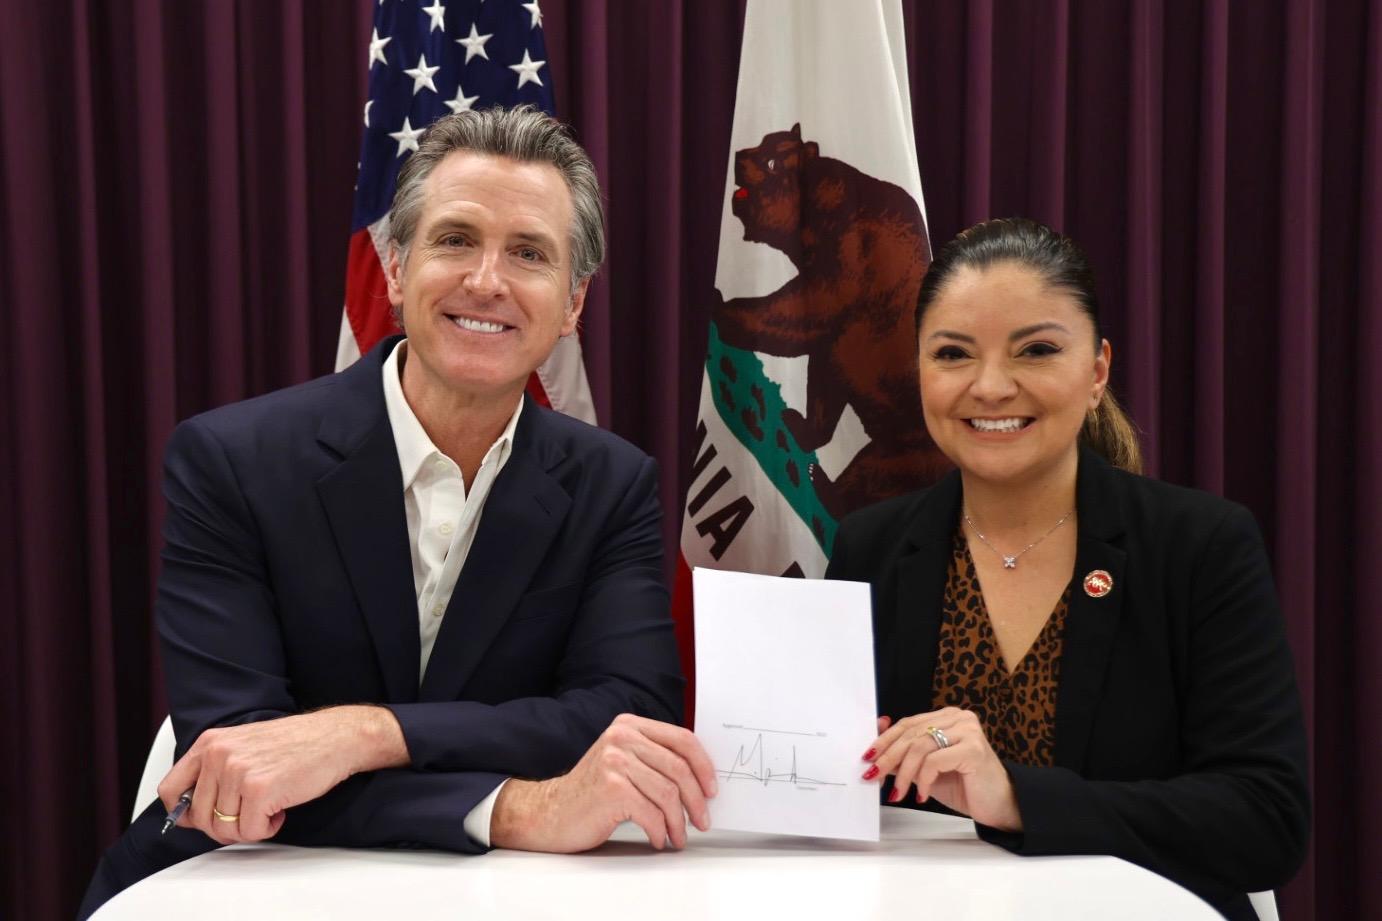 Newsom Signs Law to Give California Workers More Sick Days Each Year